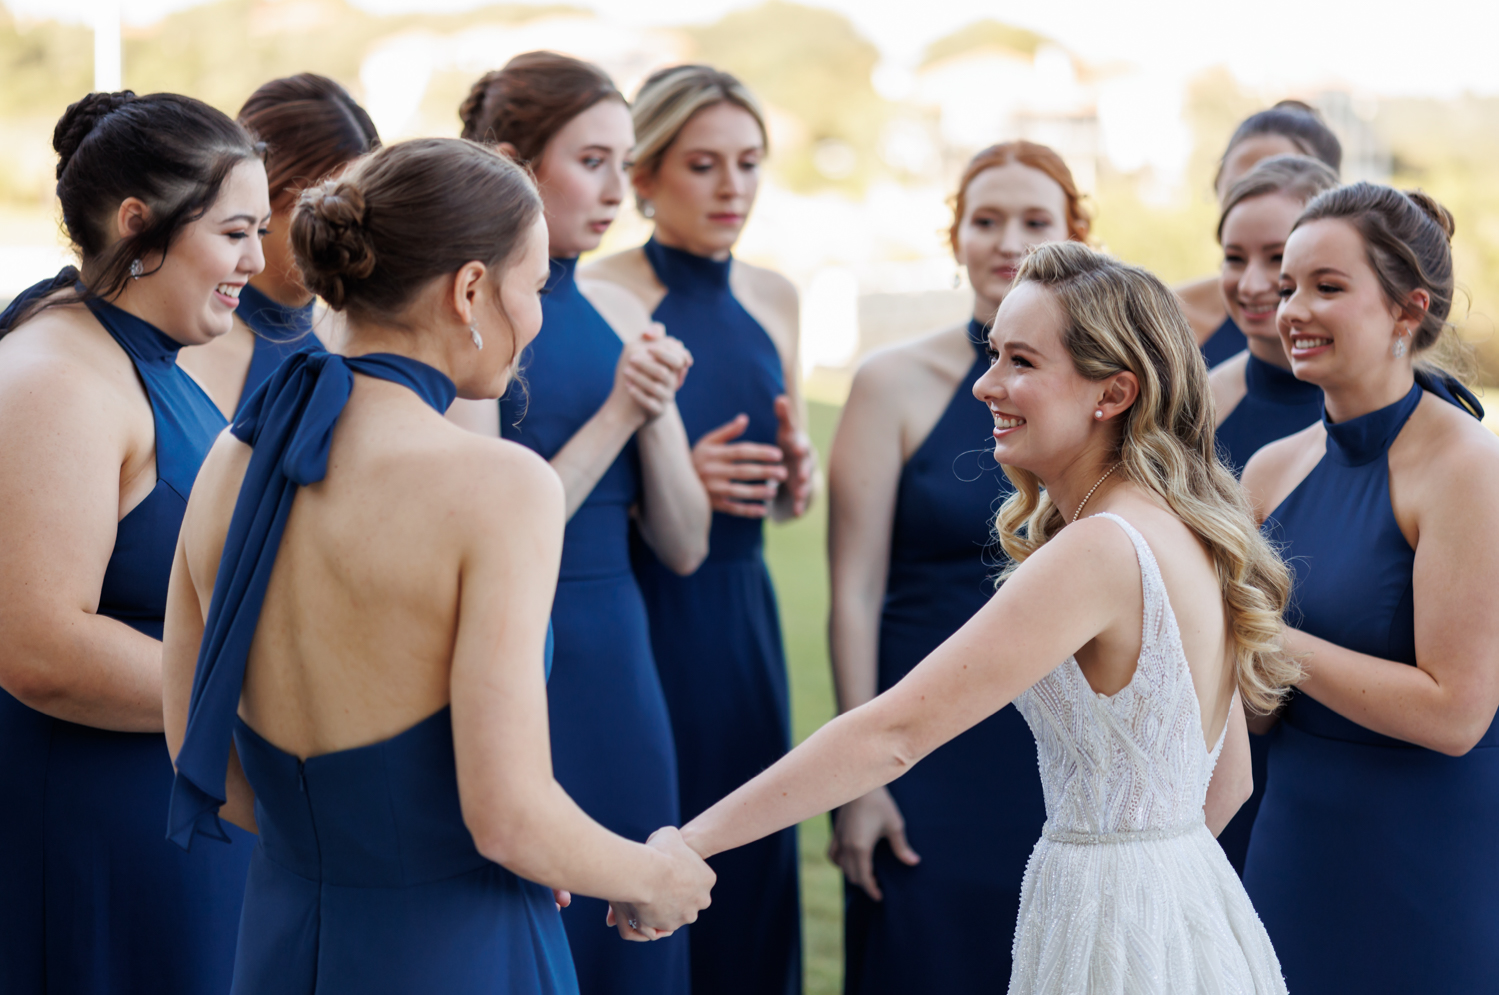 After the bridesmaid reveal, the bride embraces her friends, smiling.